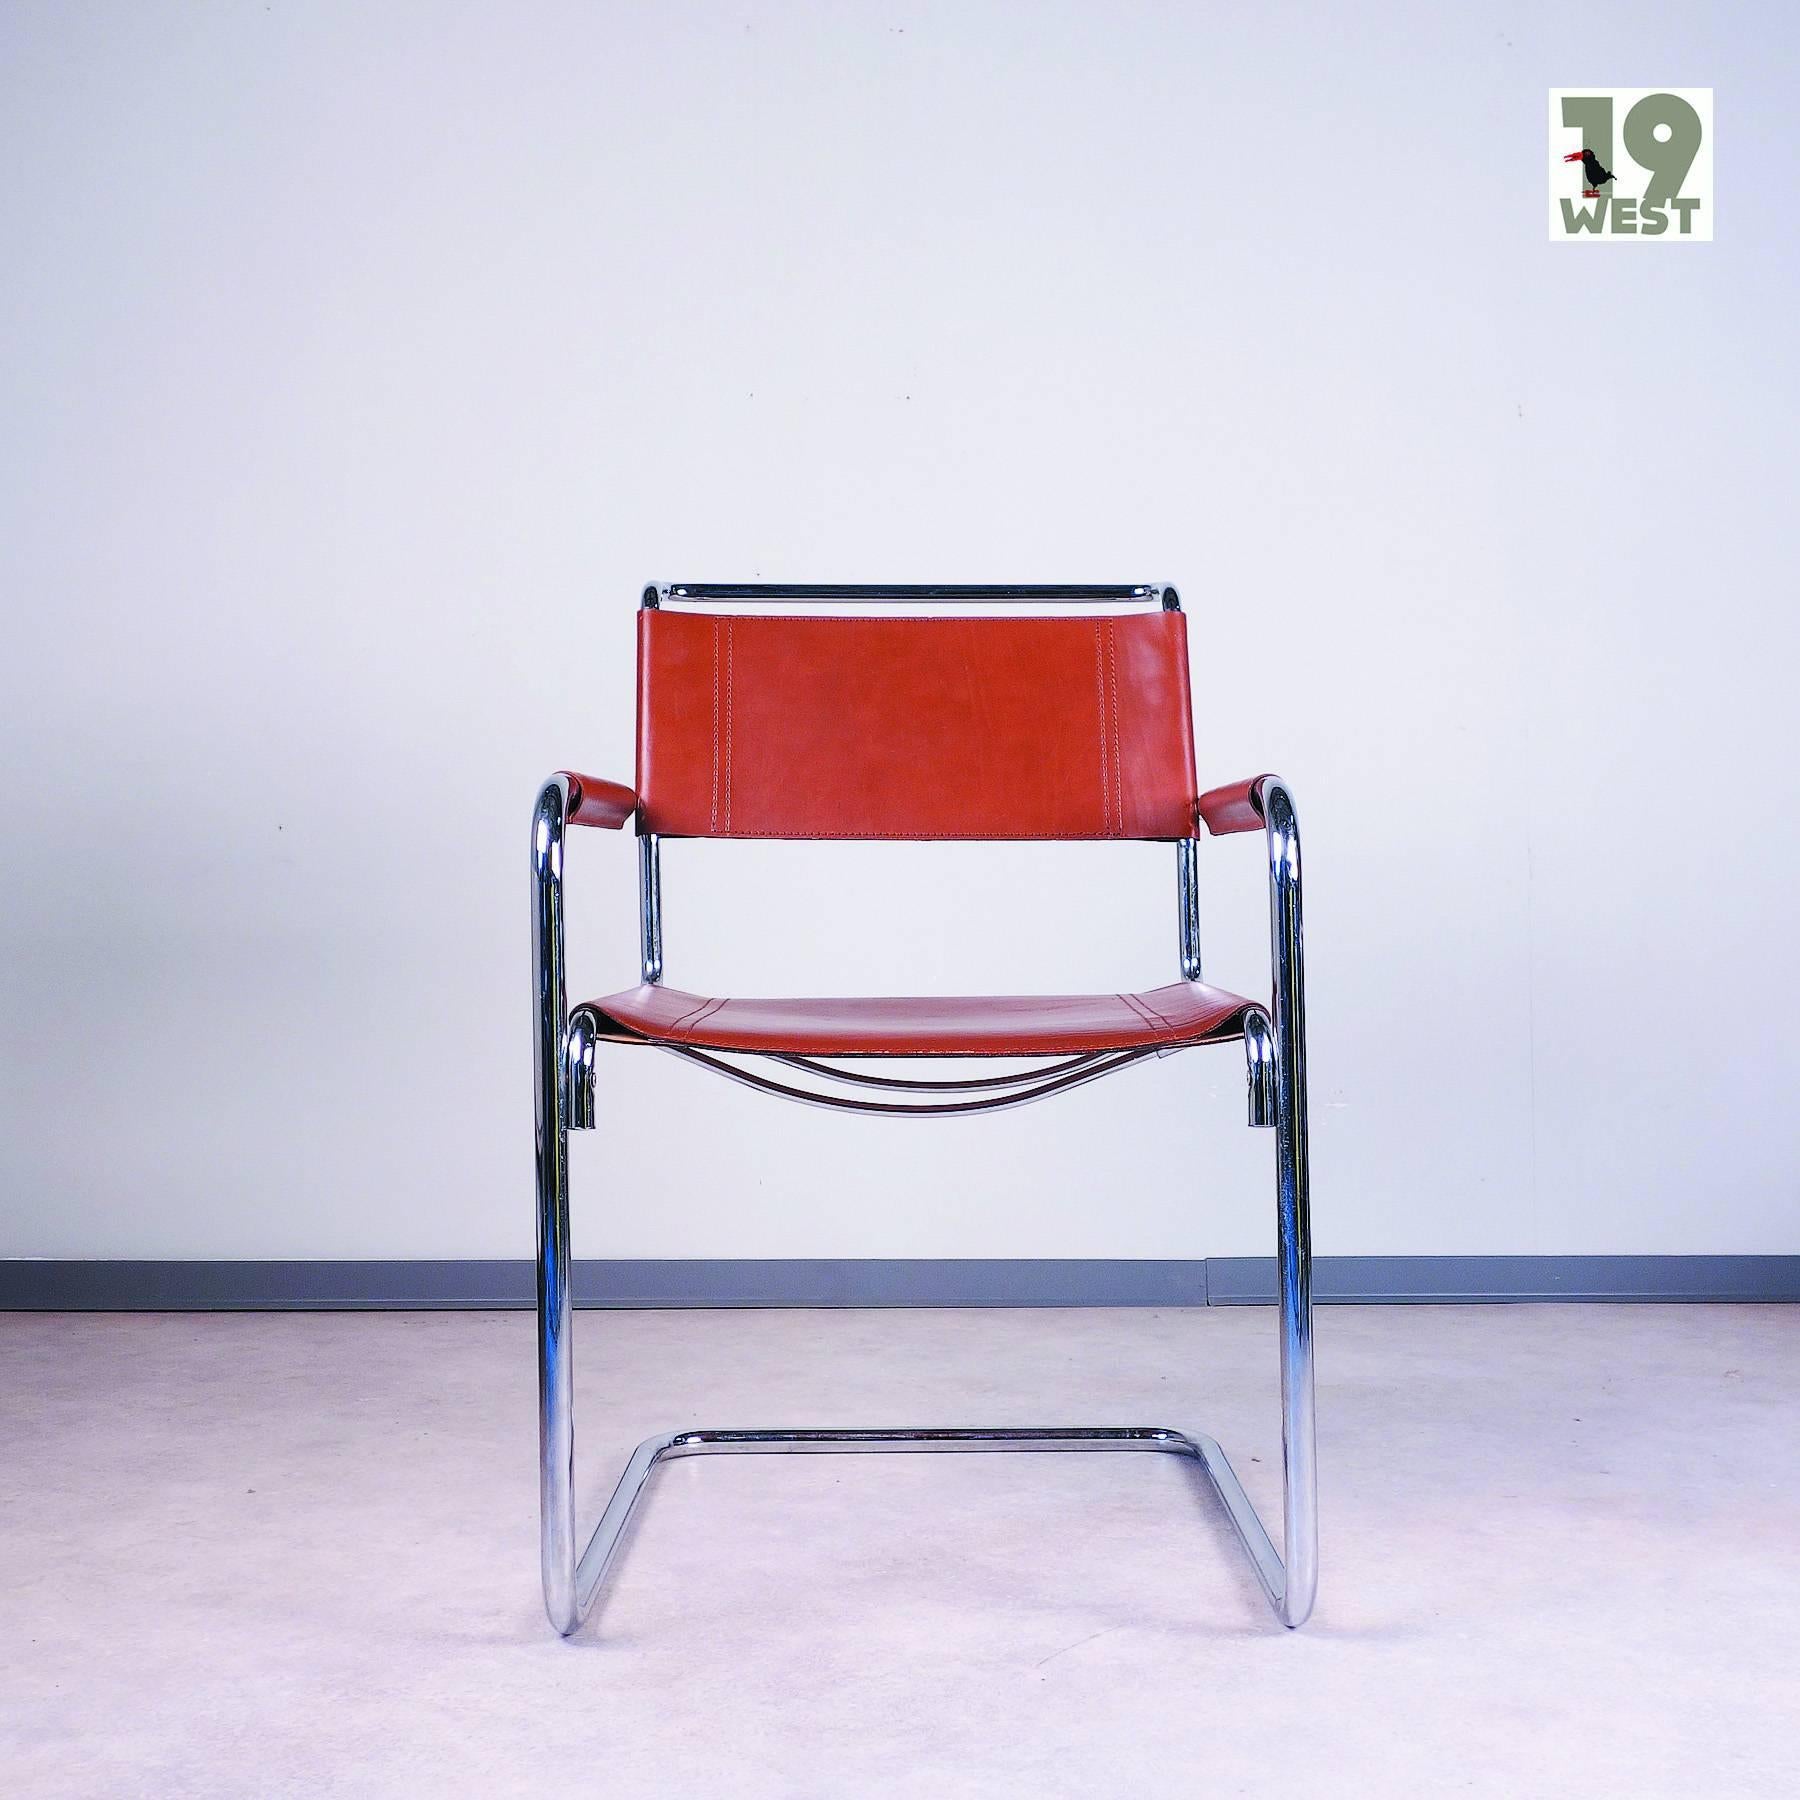 Bauhaus Tubular Steel Cantilever Chair by Linea Veam, 1980s For Sale